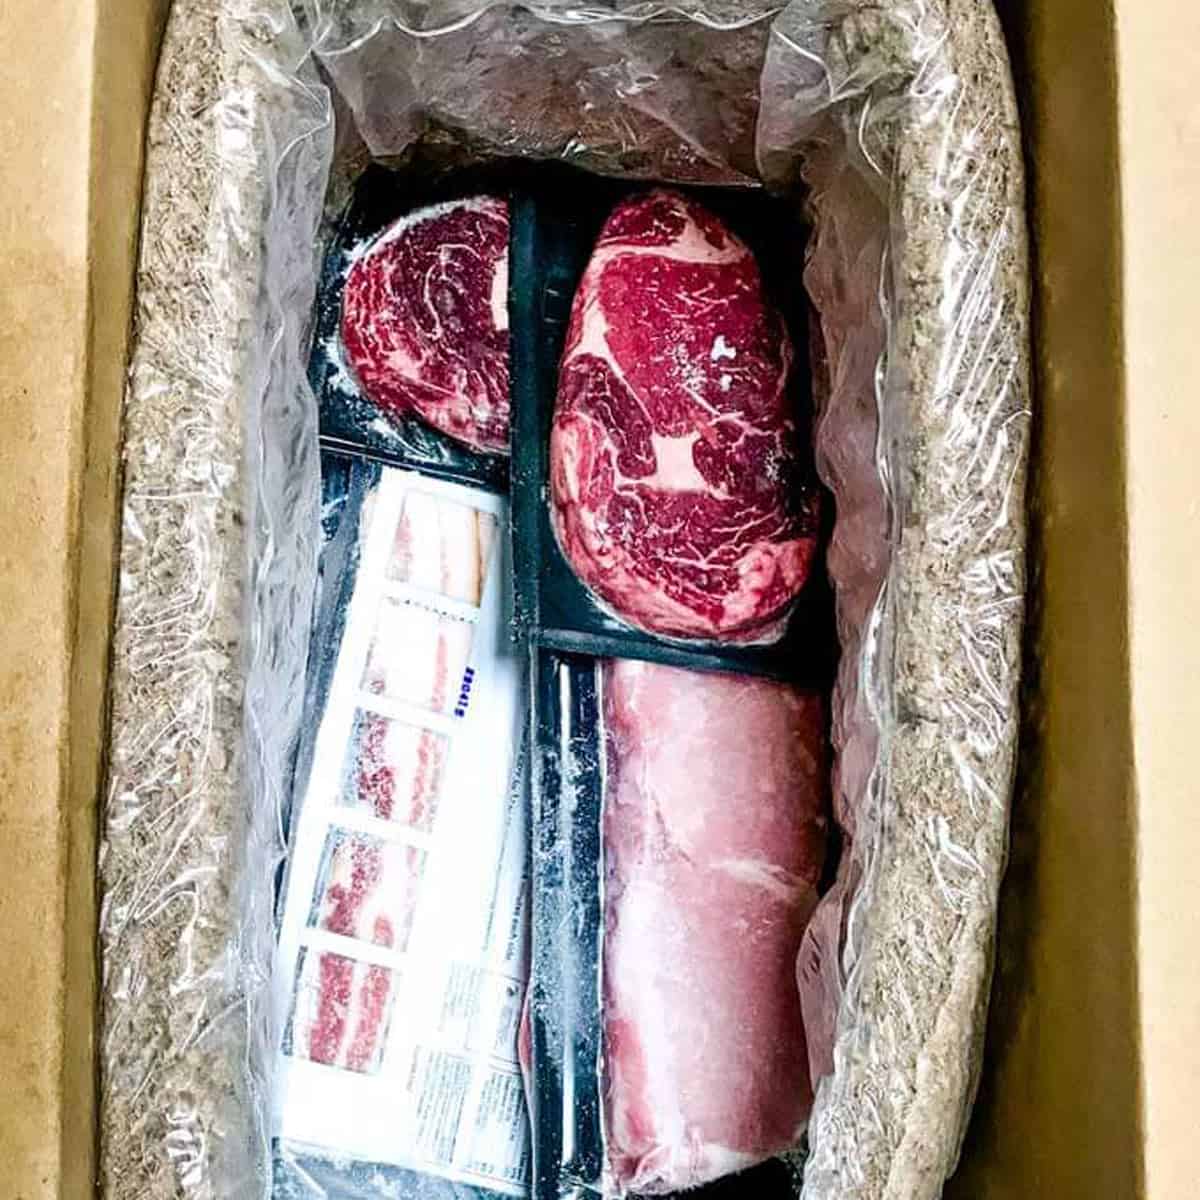 Why We Love ButcherBox (an honest review)